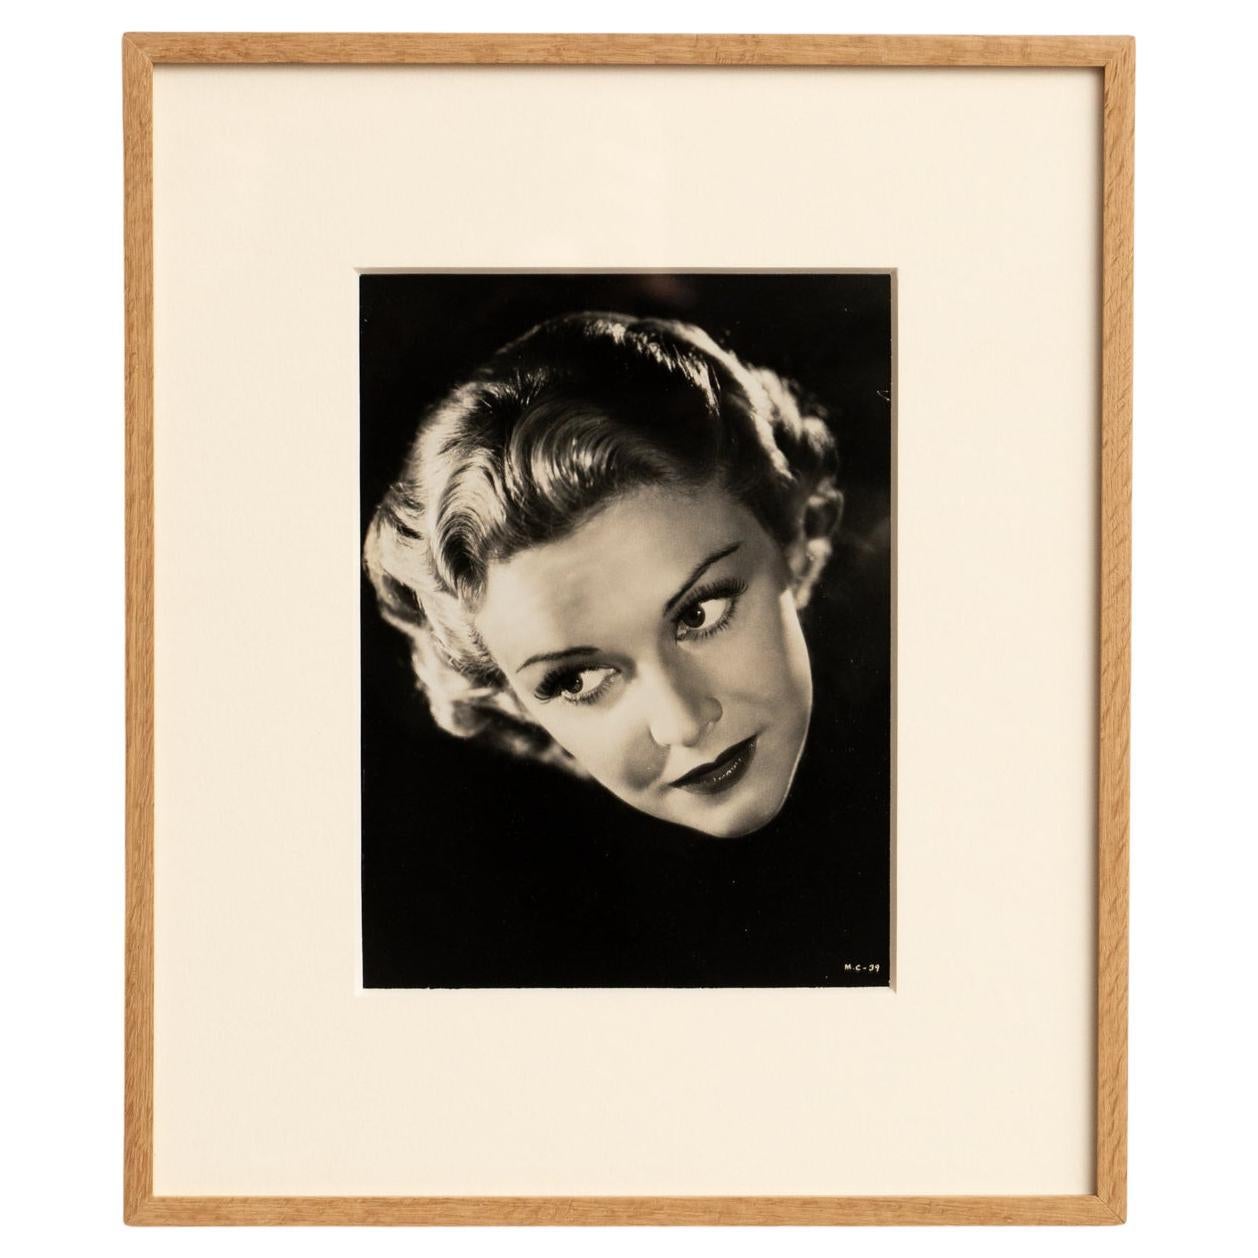 Framed Portrait Photography in Black and White of Madeline Carroll, circa 1938